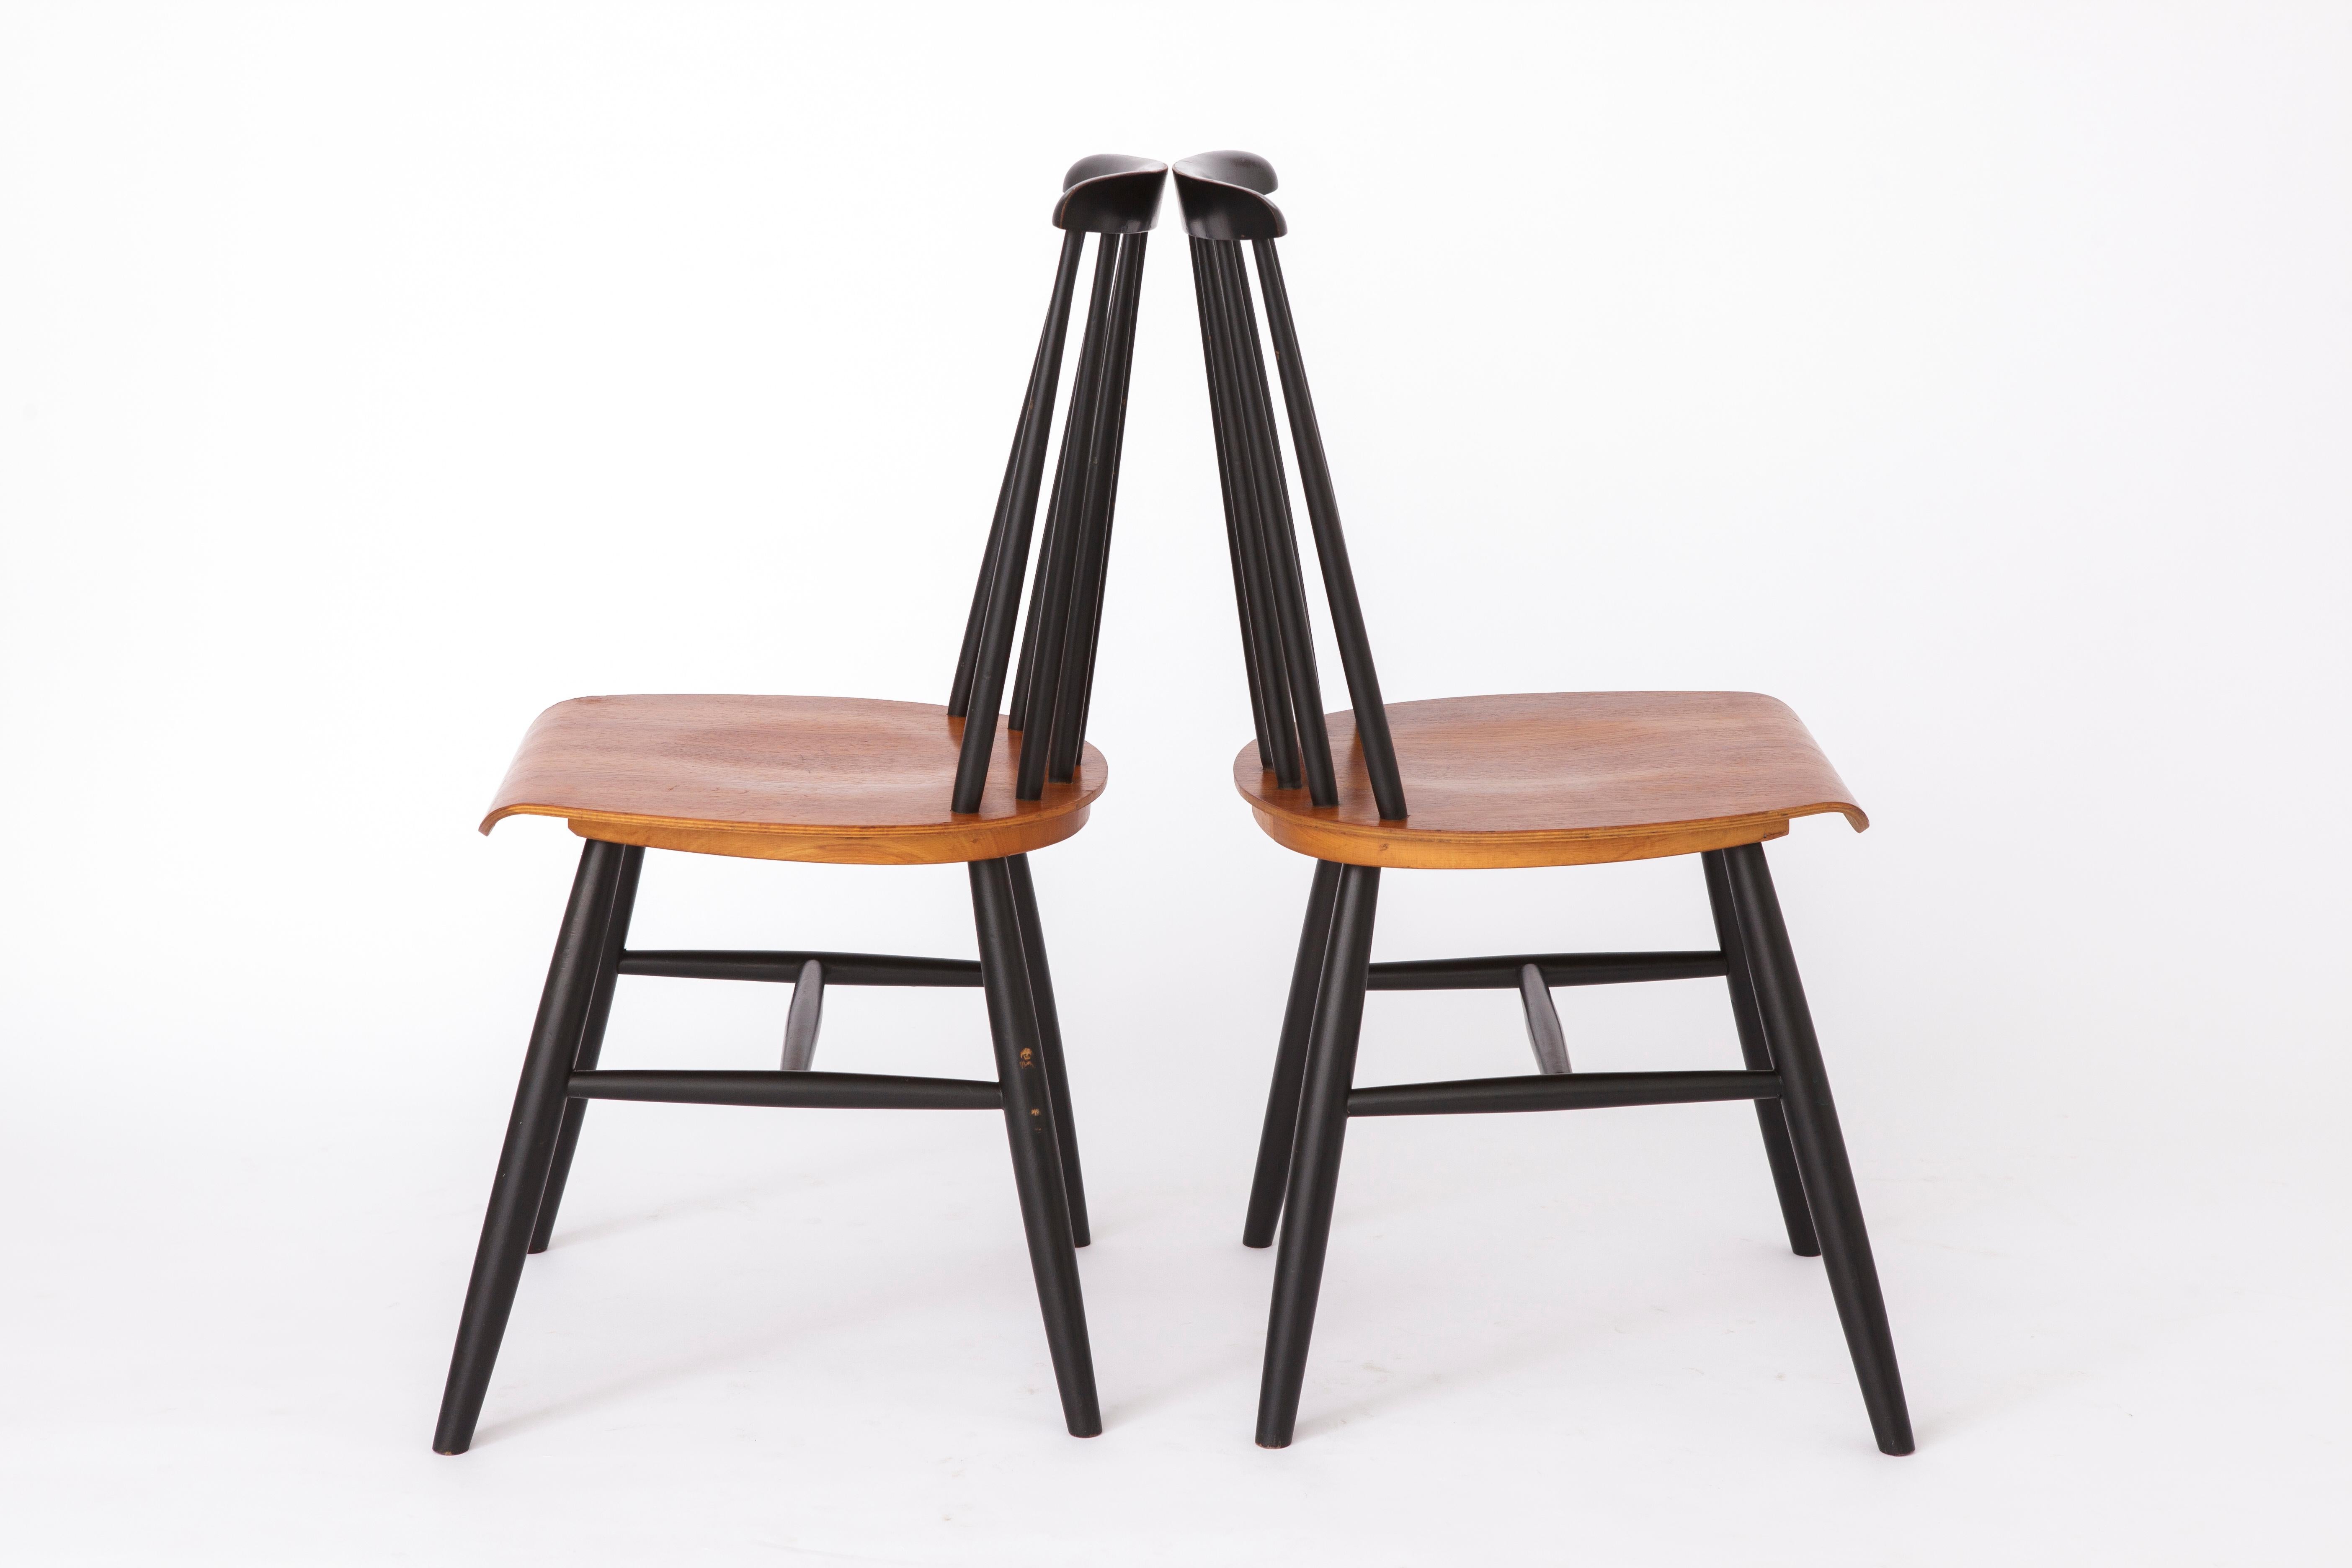 Pair of midcentury chairs, most likely from the manufacturer Nesto, Sweden. 
Production period: 1960s-1970s. 
Displayed price is for a pair. 

Good, stable condition. Teak wood seat and black lacquered birch wood frame. 
No cracks or repairs in the